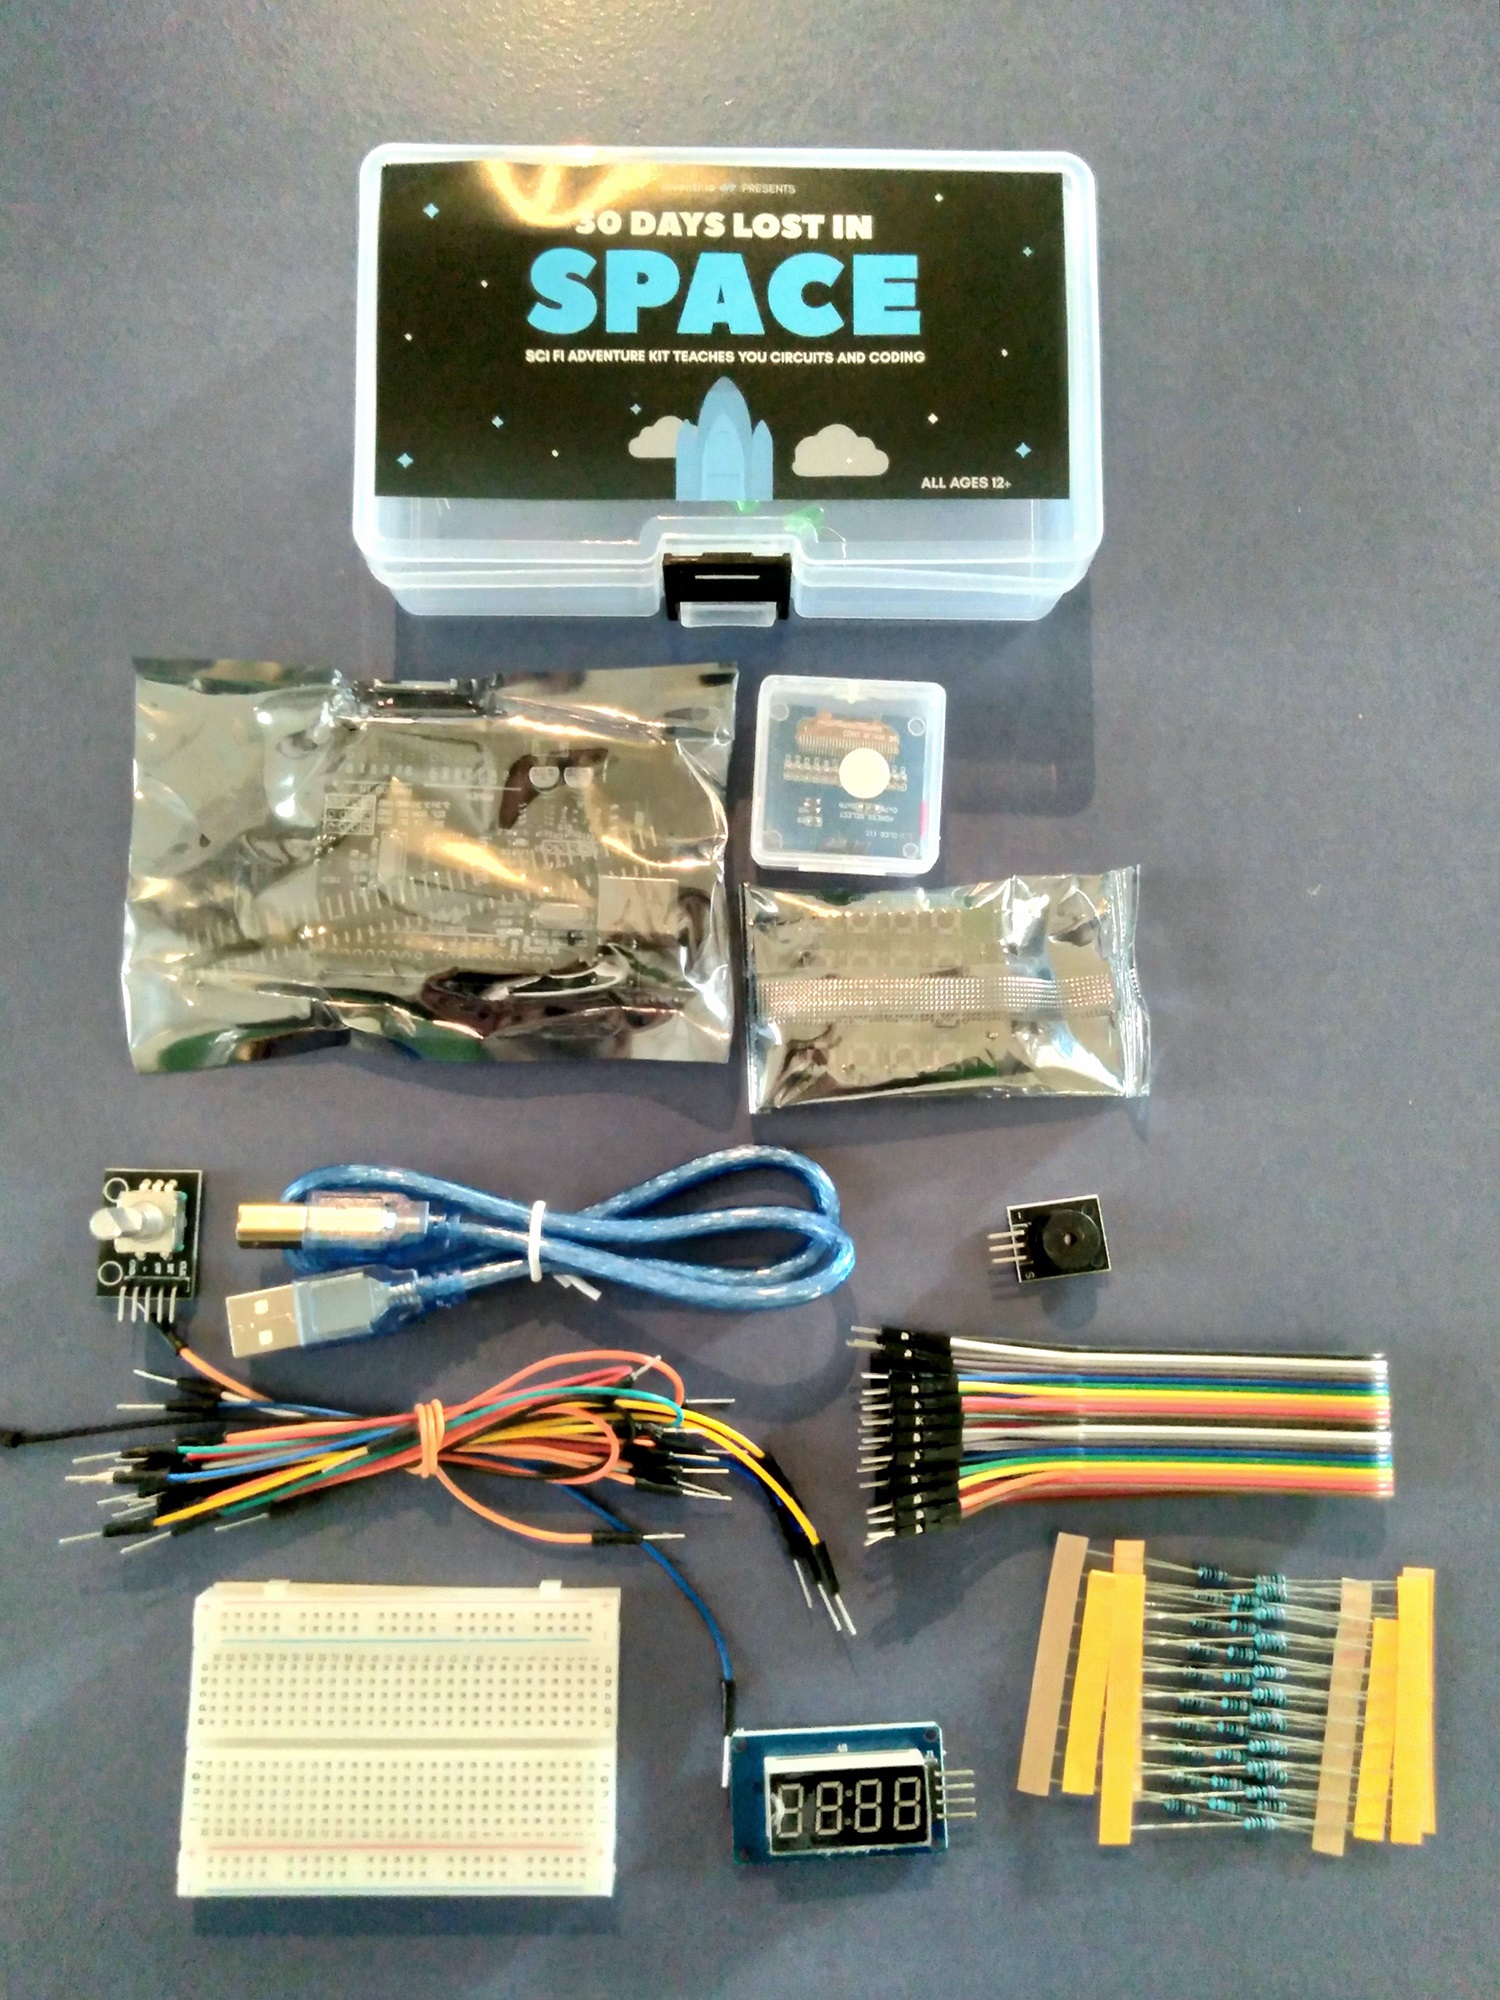 Lost in space class kit contents